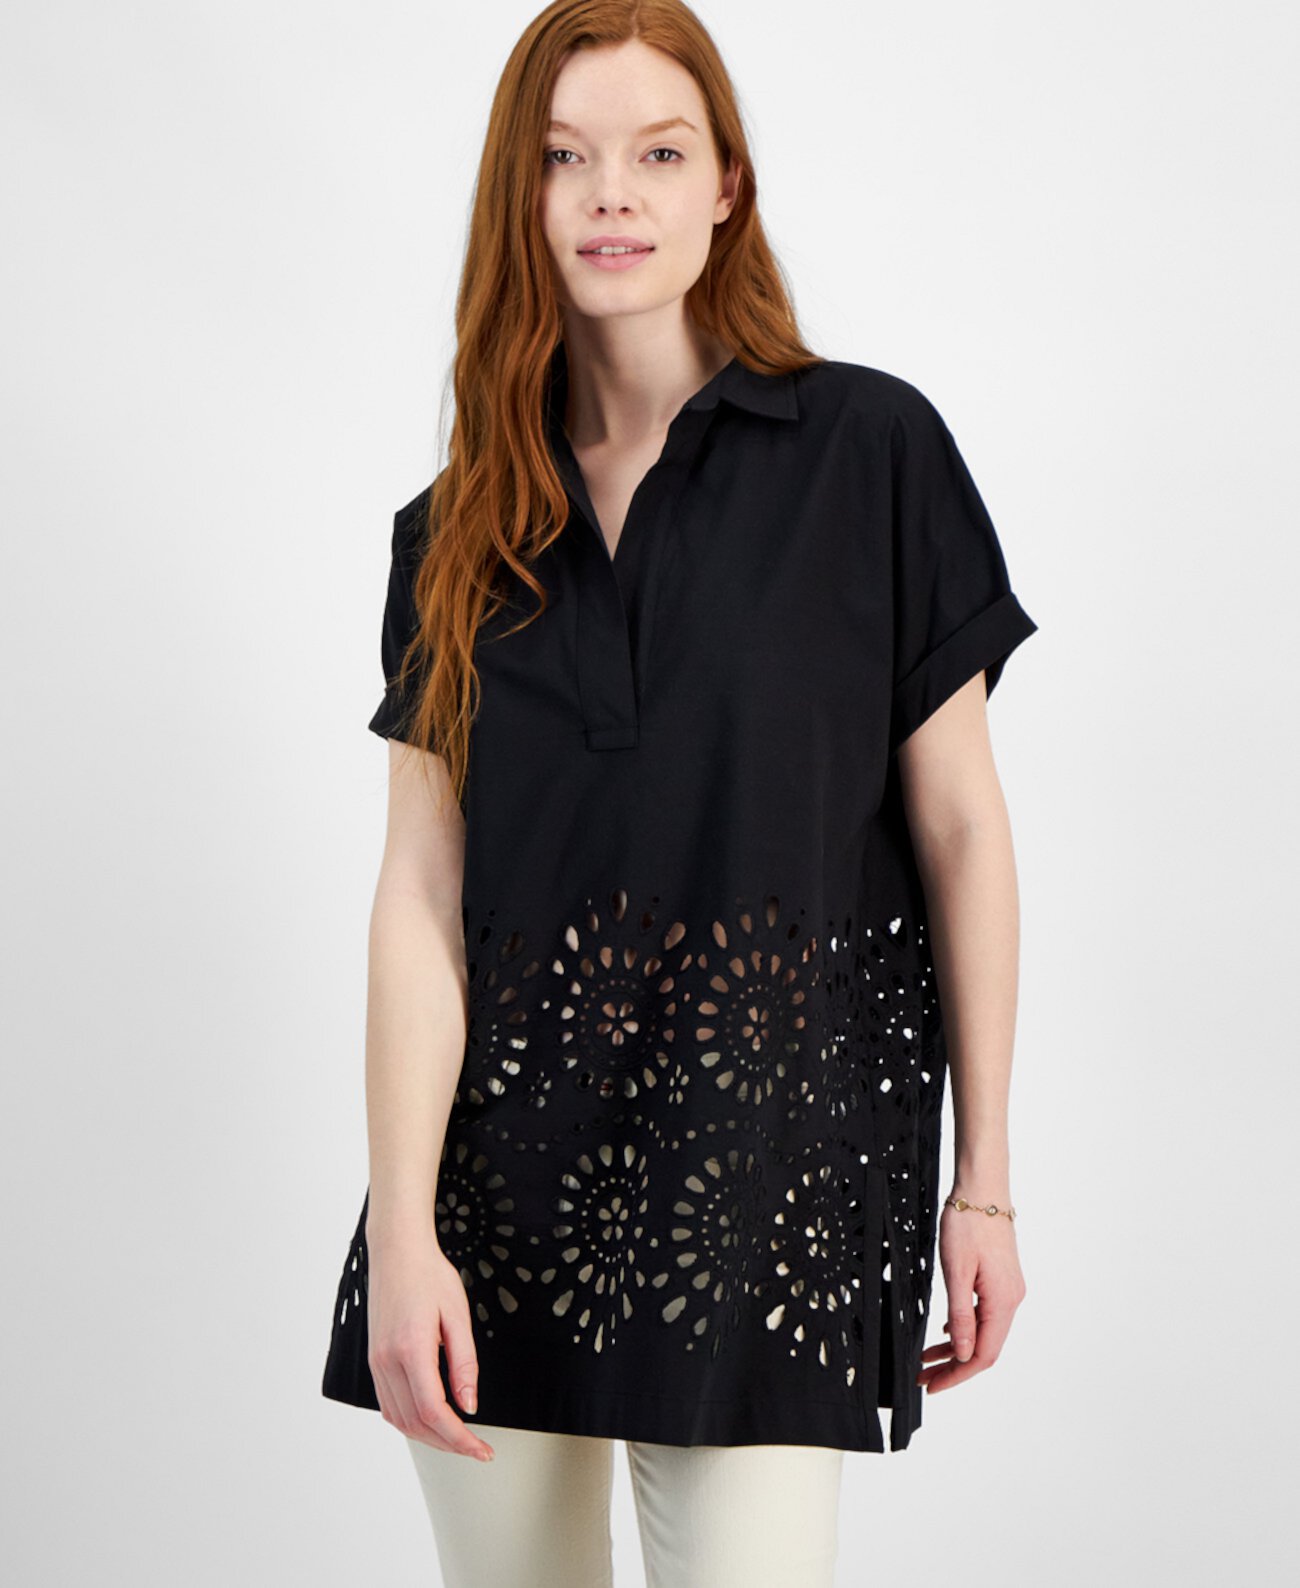 Women's Cotton Eyelet Popover Top Tommy Hilfiger